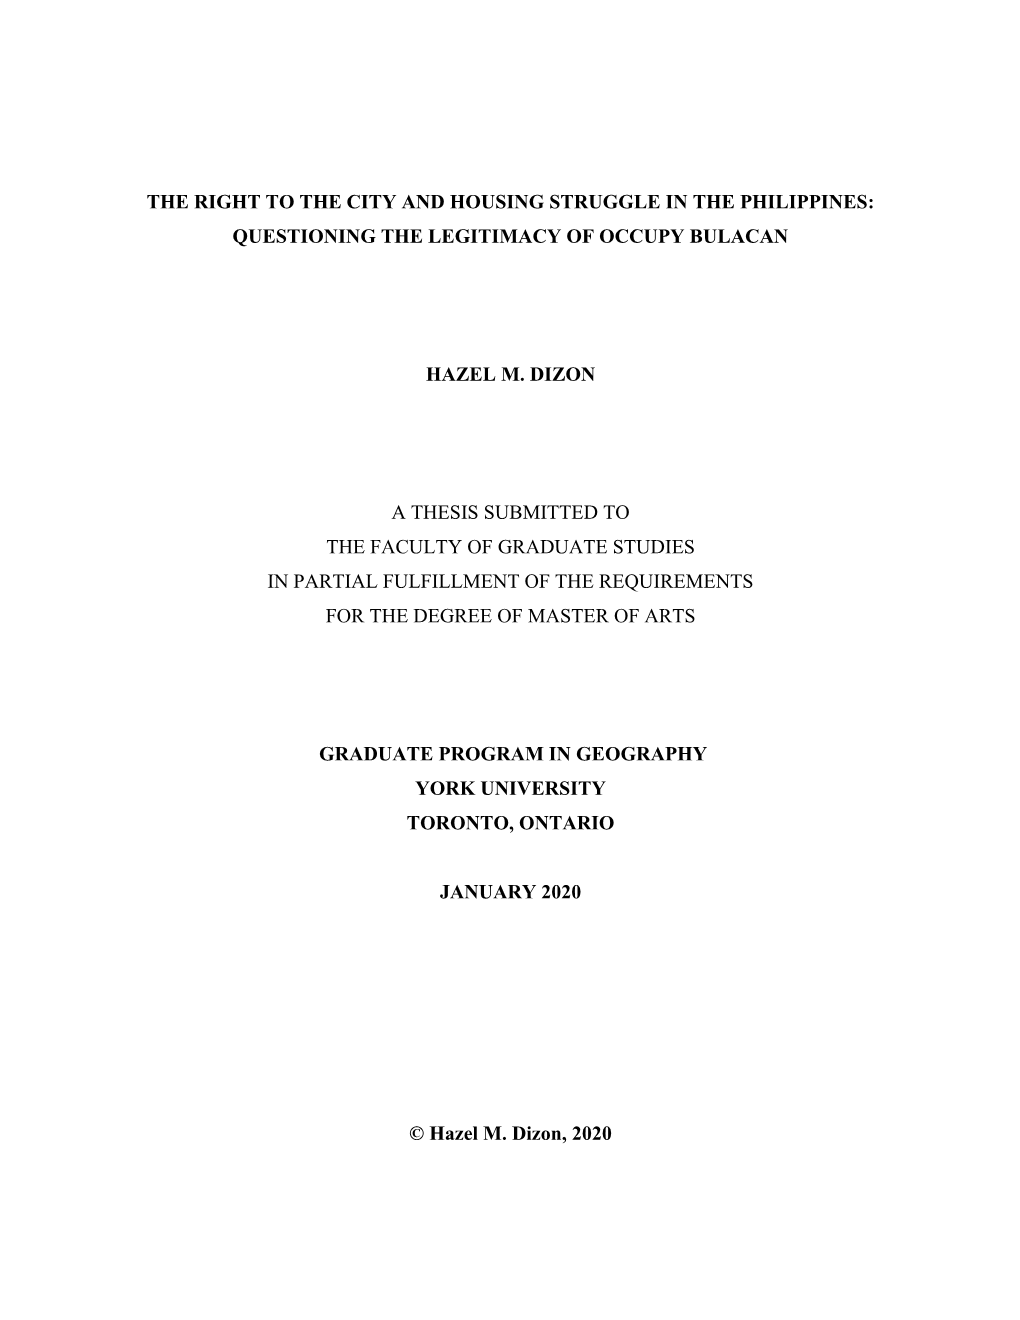 The Right to the City and Housing Struggle in the Philippines: Questioning the Legitimacy of Occupy Bulacan